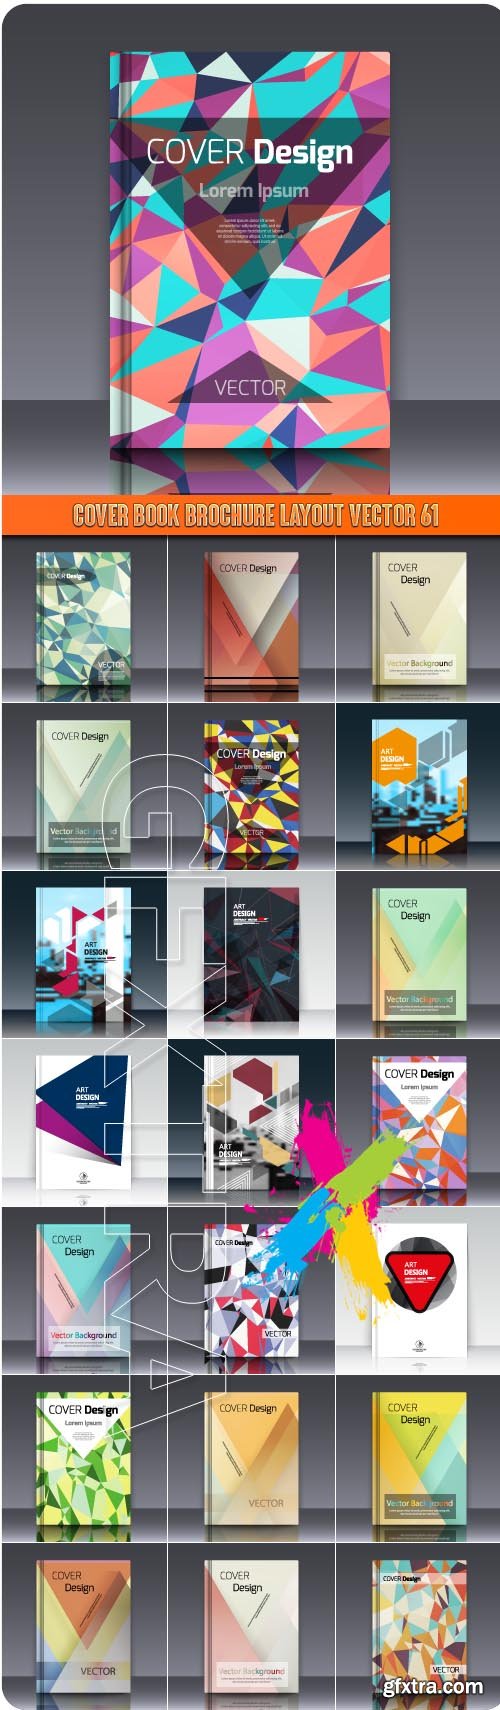 Cover book brochure layout vector 61